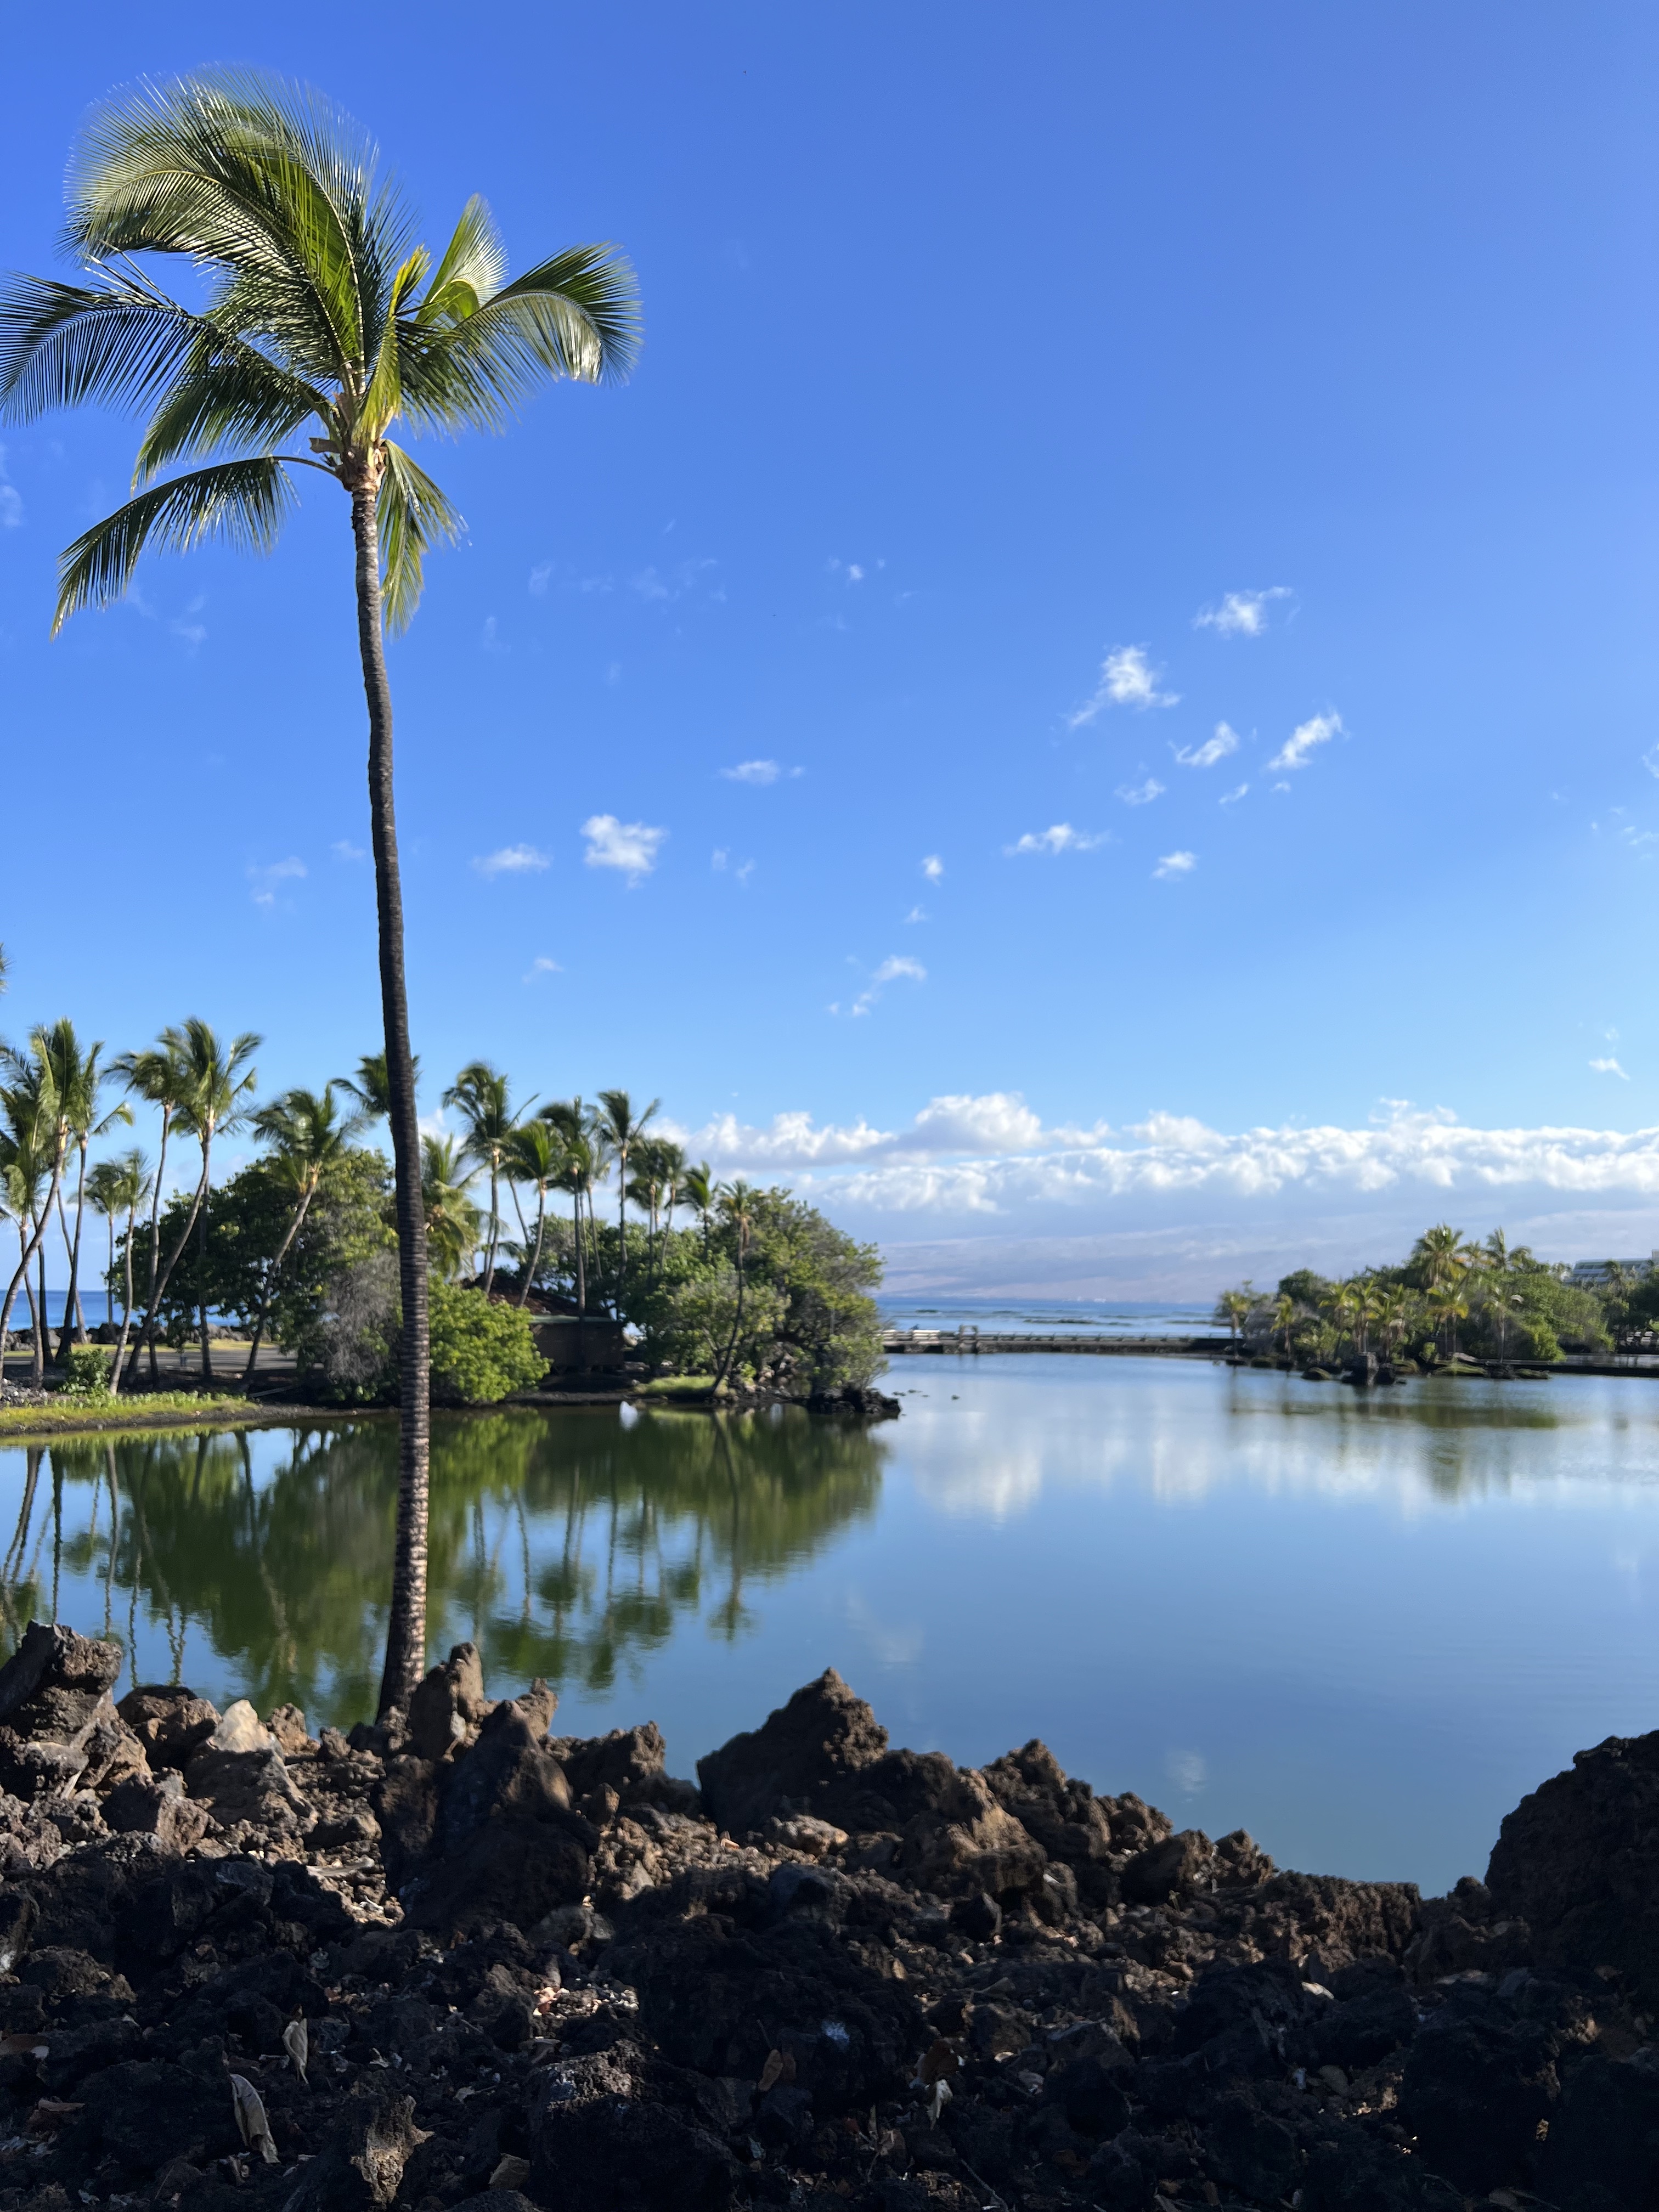 Big Island of Hawaii Hotels and Things to Do